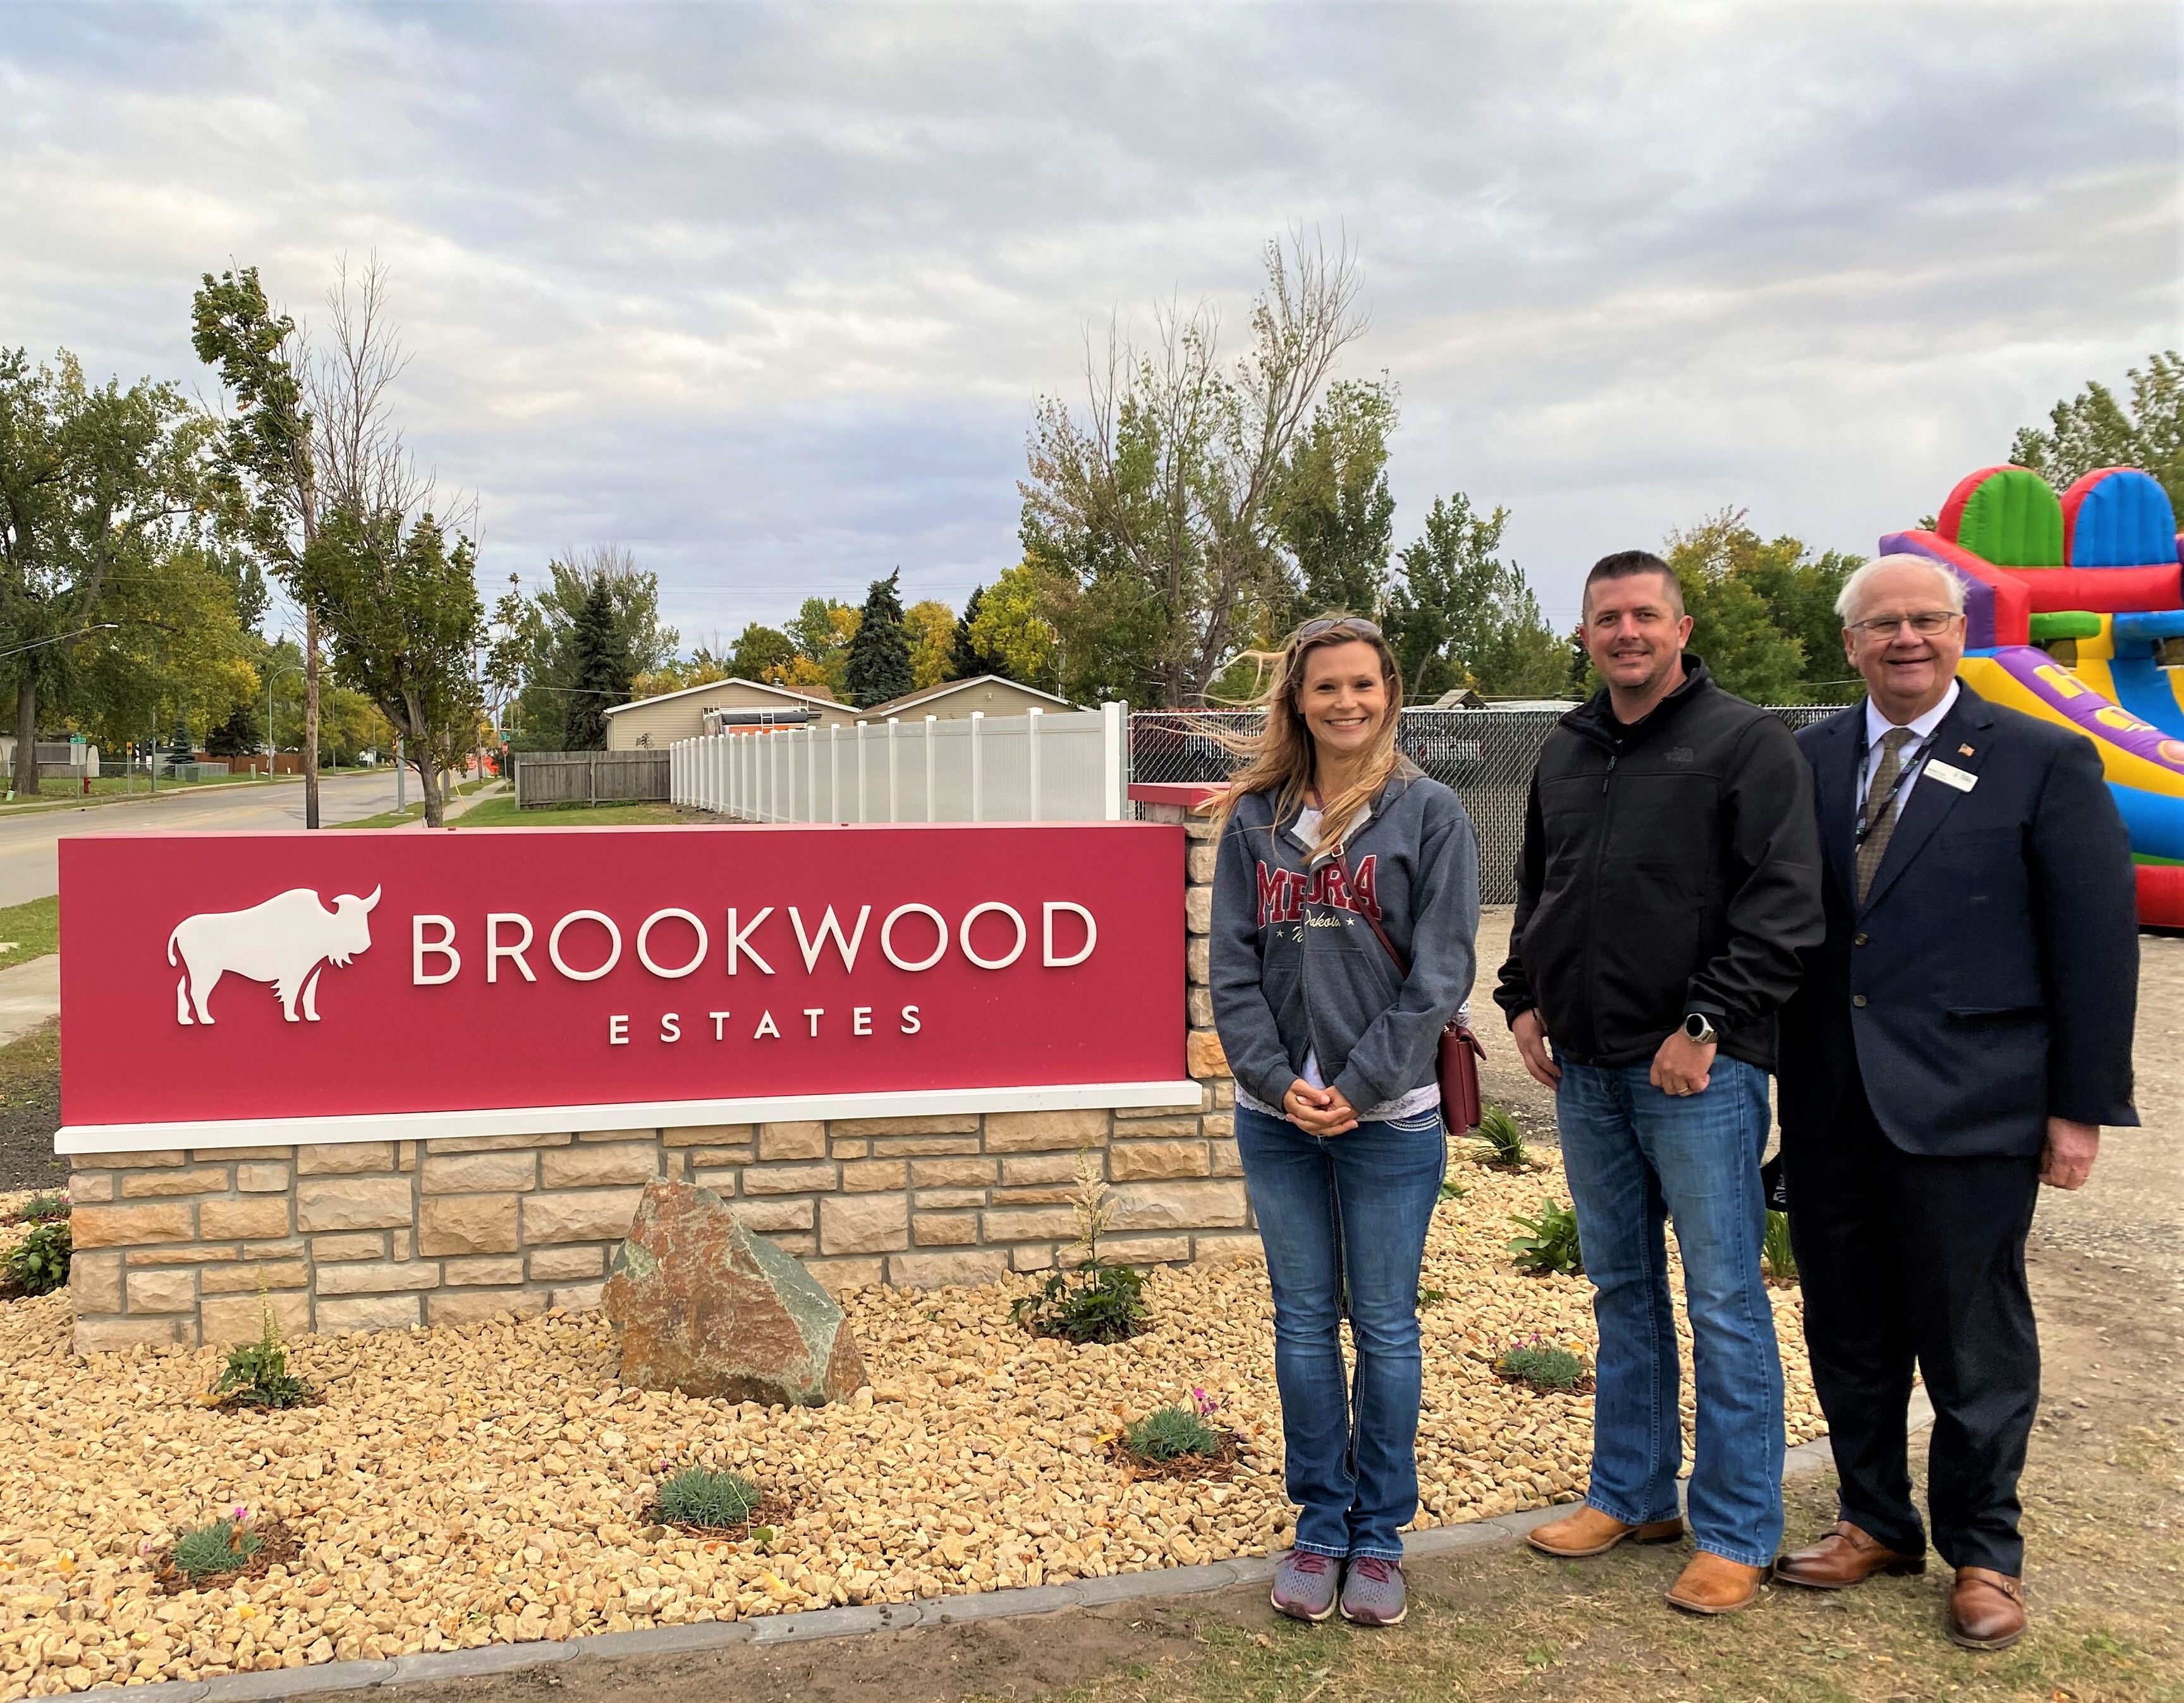 West Fargo City commissioner, Mandy George; Havepark Communities Divisional Vice President, Sean King; and West Fargo City Mayor, Bernie Dardis pose in front of the newly installed Brookwood Estates monument sign.